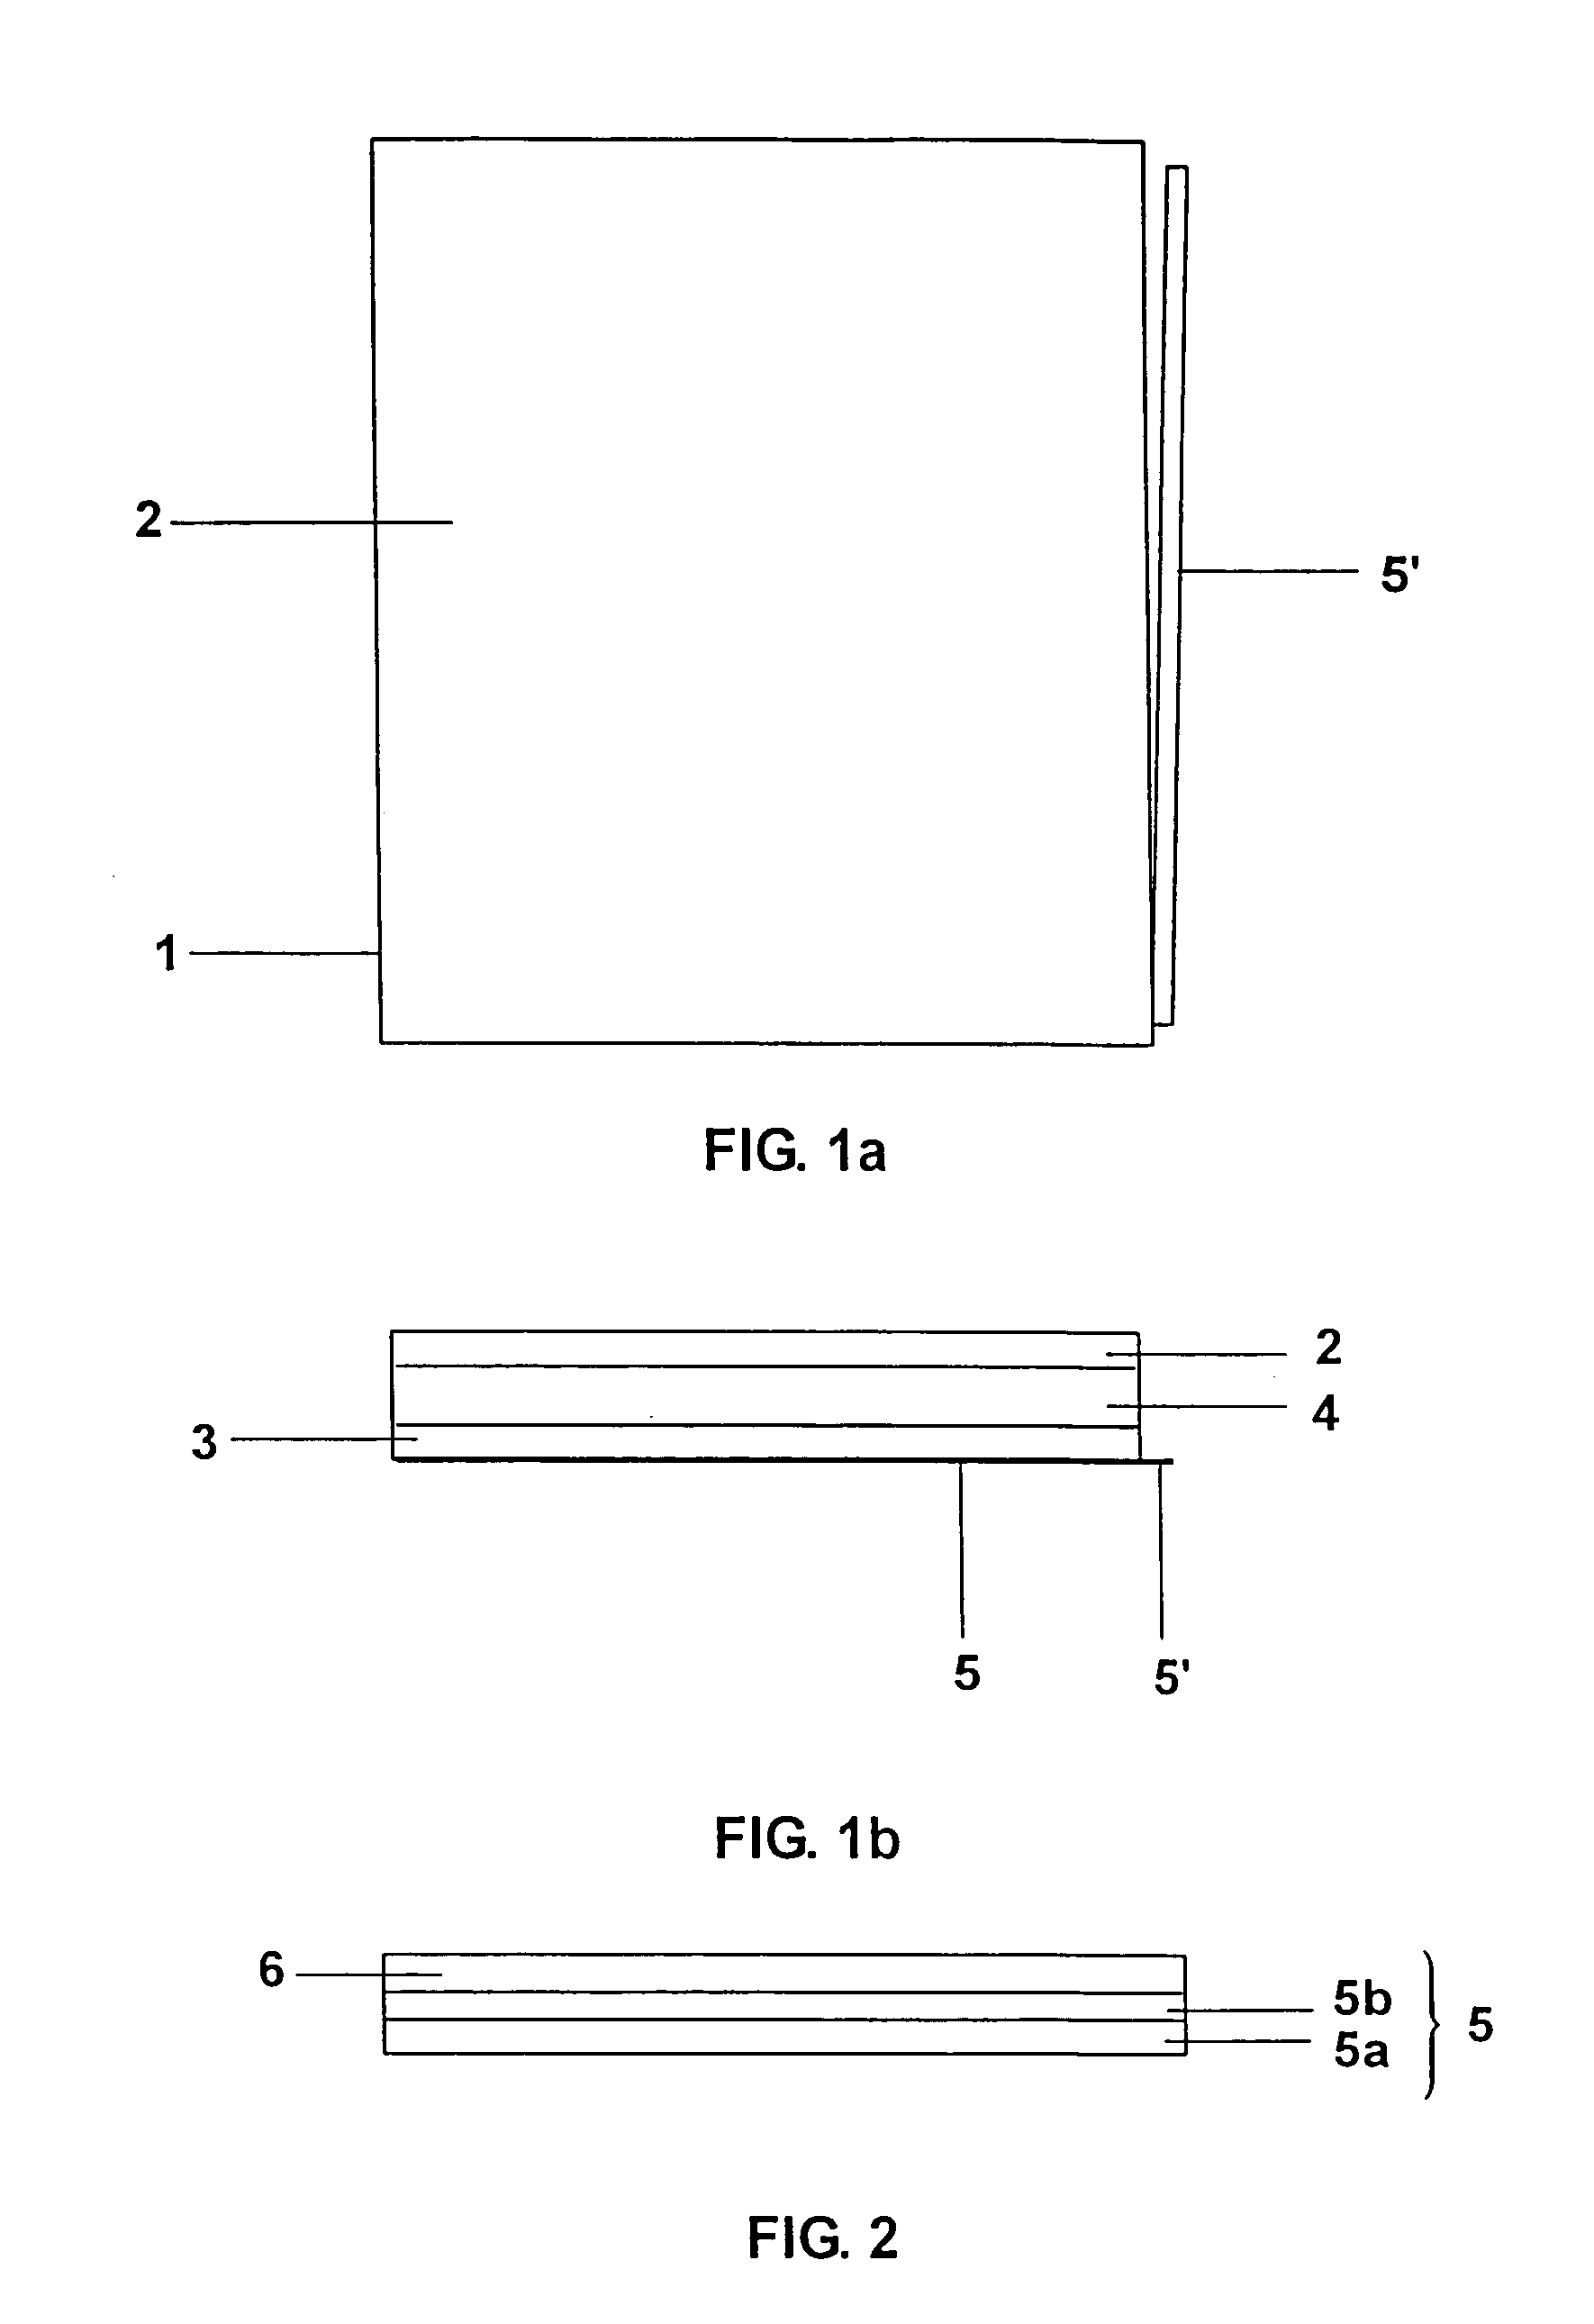 Discharge lamp having at least one external electrode, adhesive layer, and carrier film